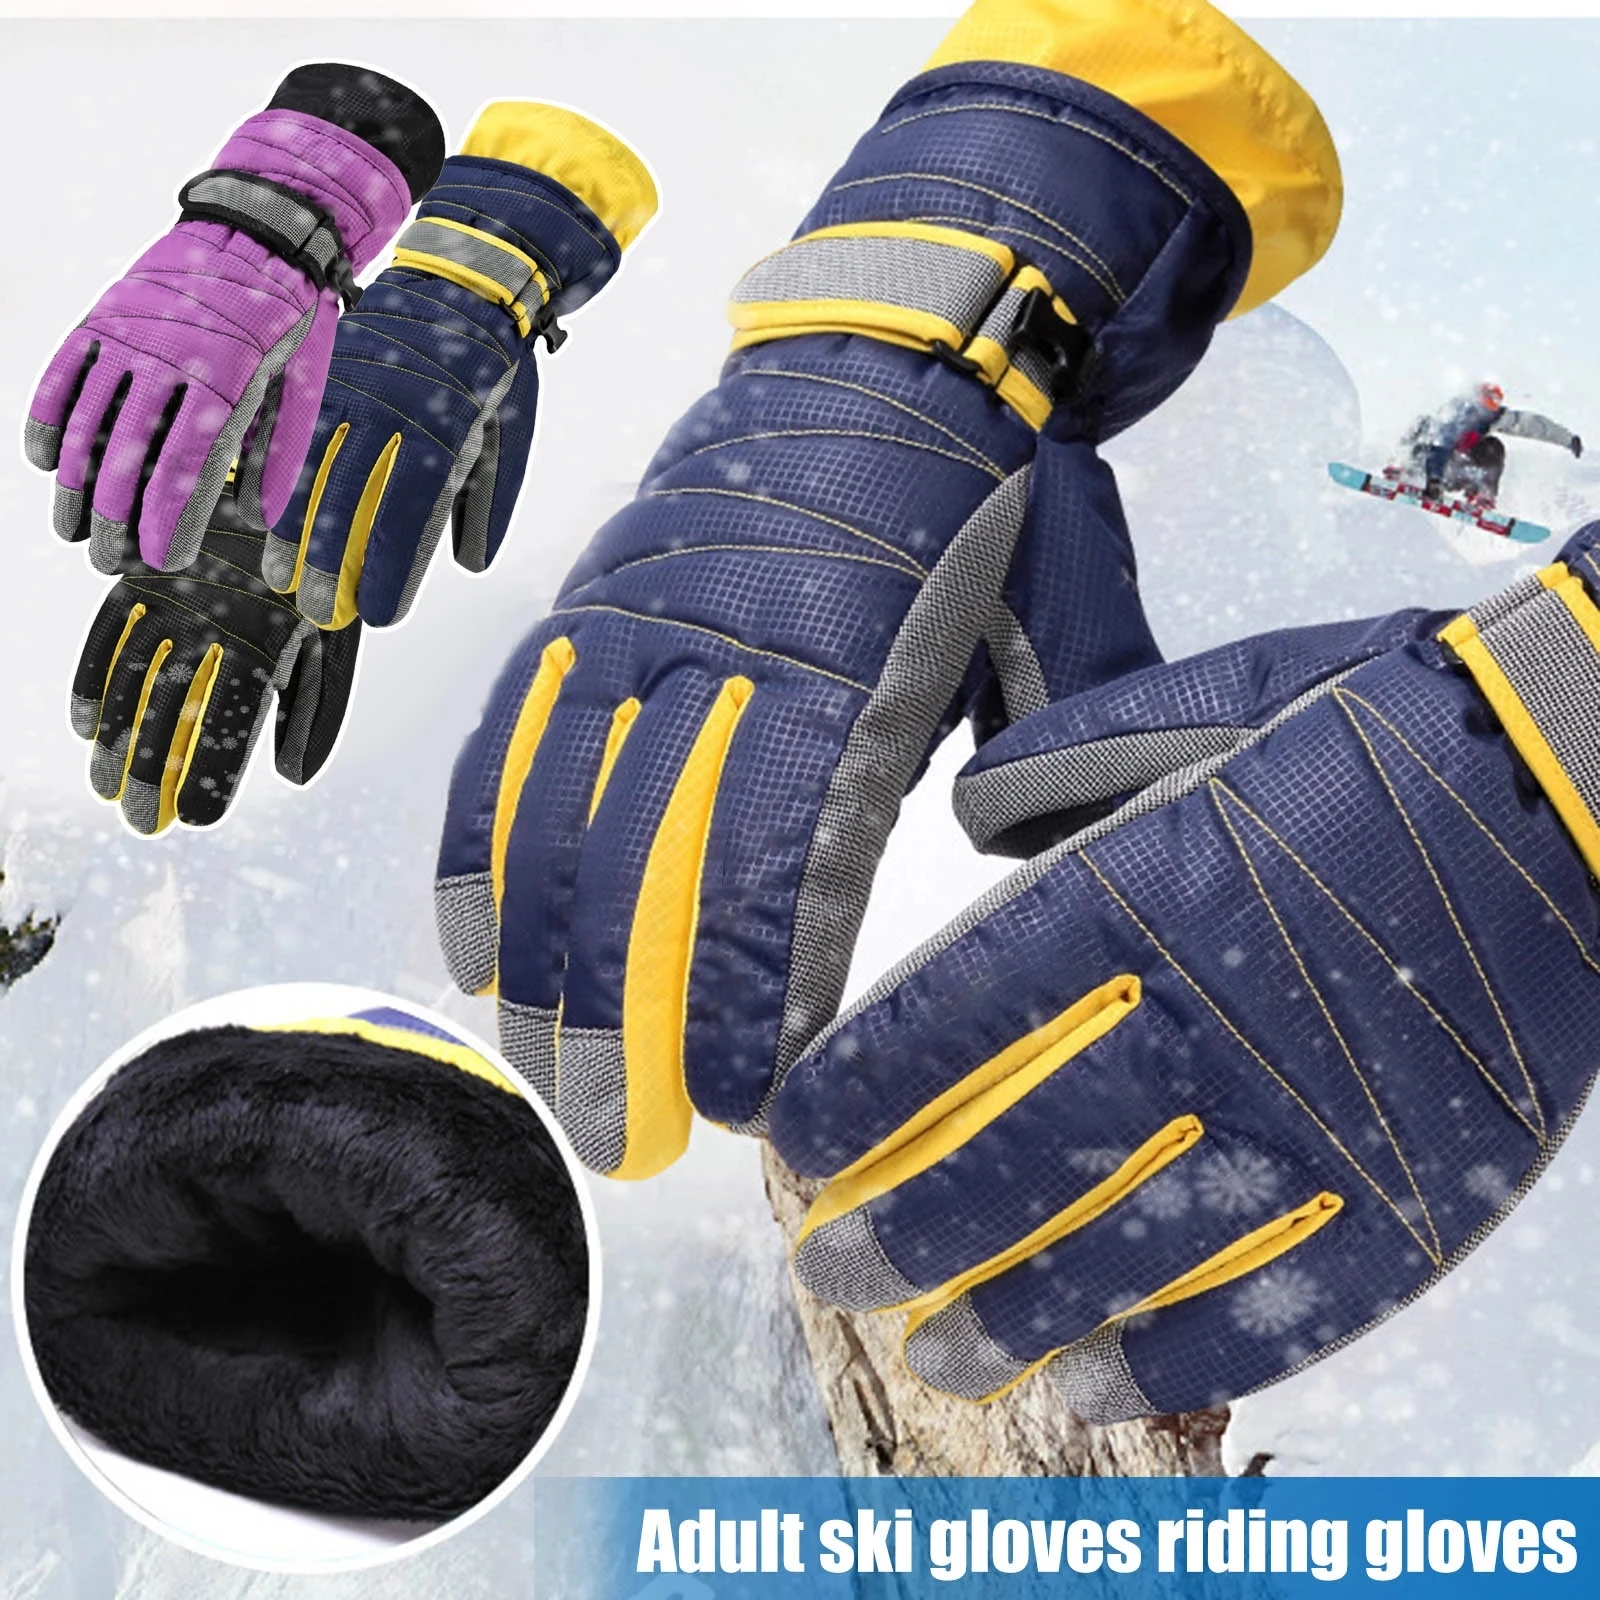 

Tech Winter Gloves: Waterproof, Windproof, Snowproof for Unisex. Keep Your Hands Warm and Safe in Cold Weather -40